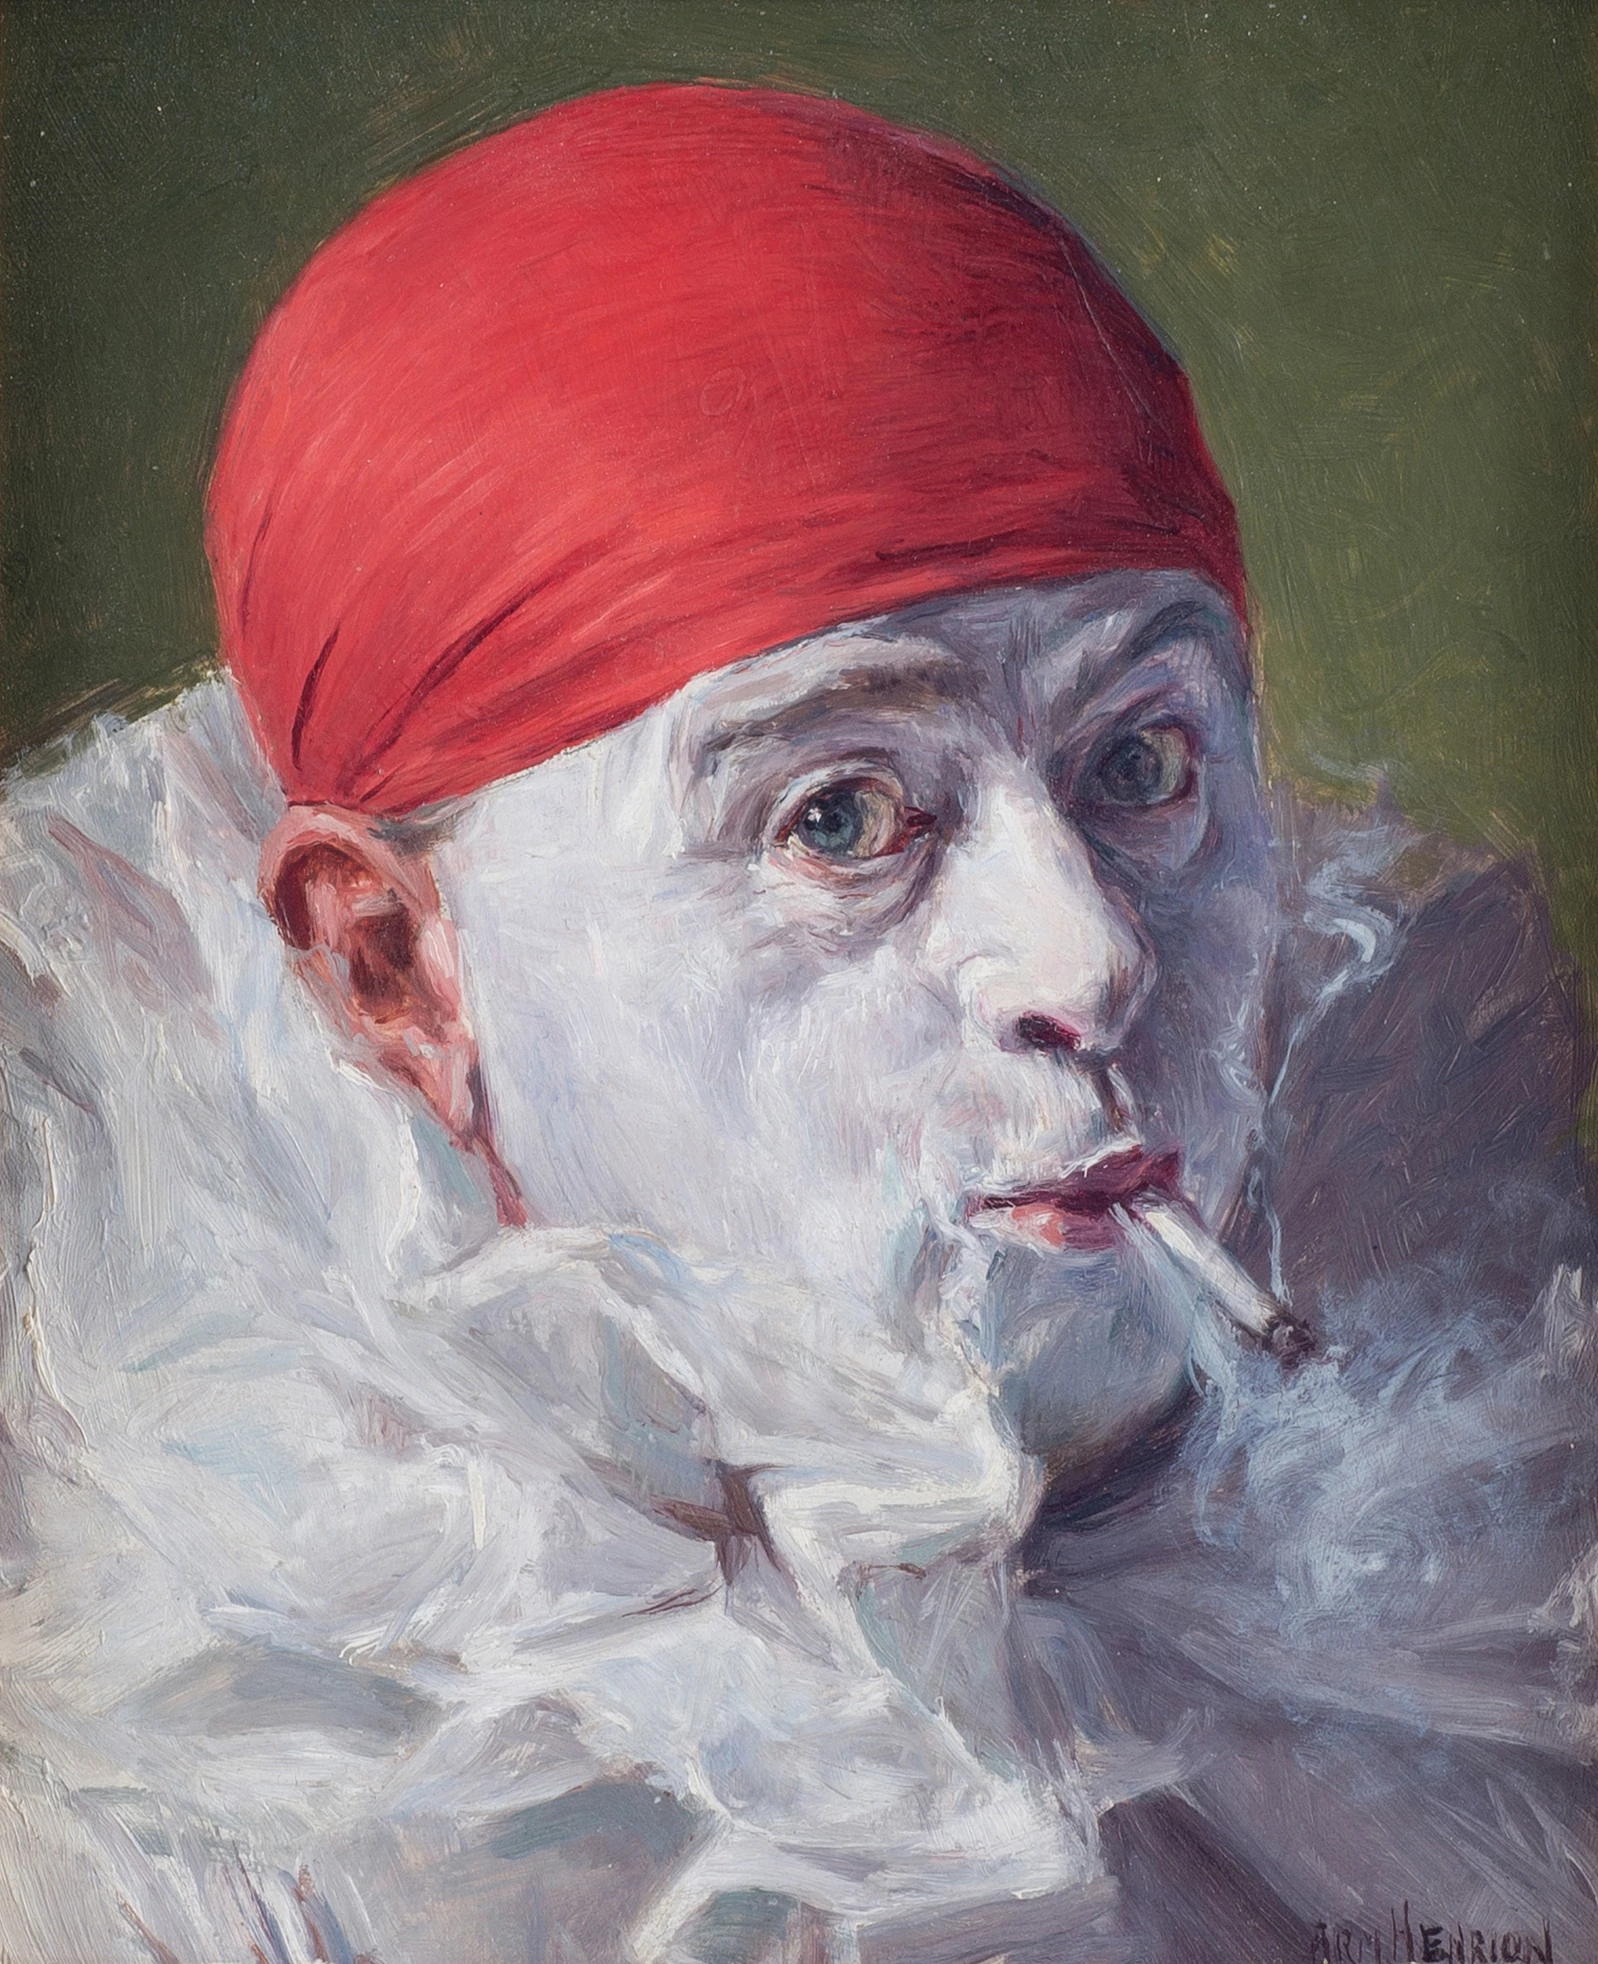 Self Portrait with Red Cap, Armand Henrion